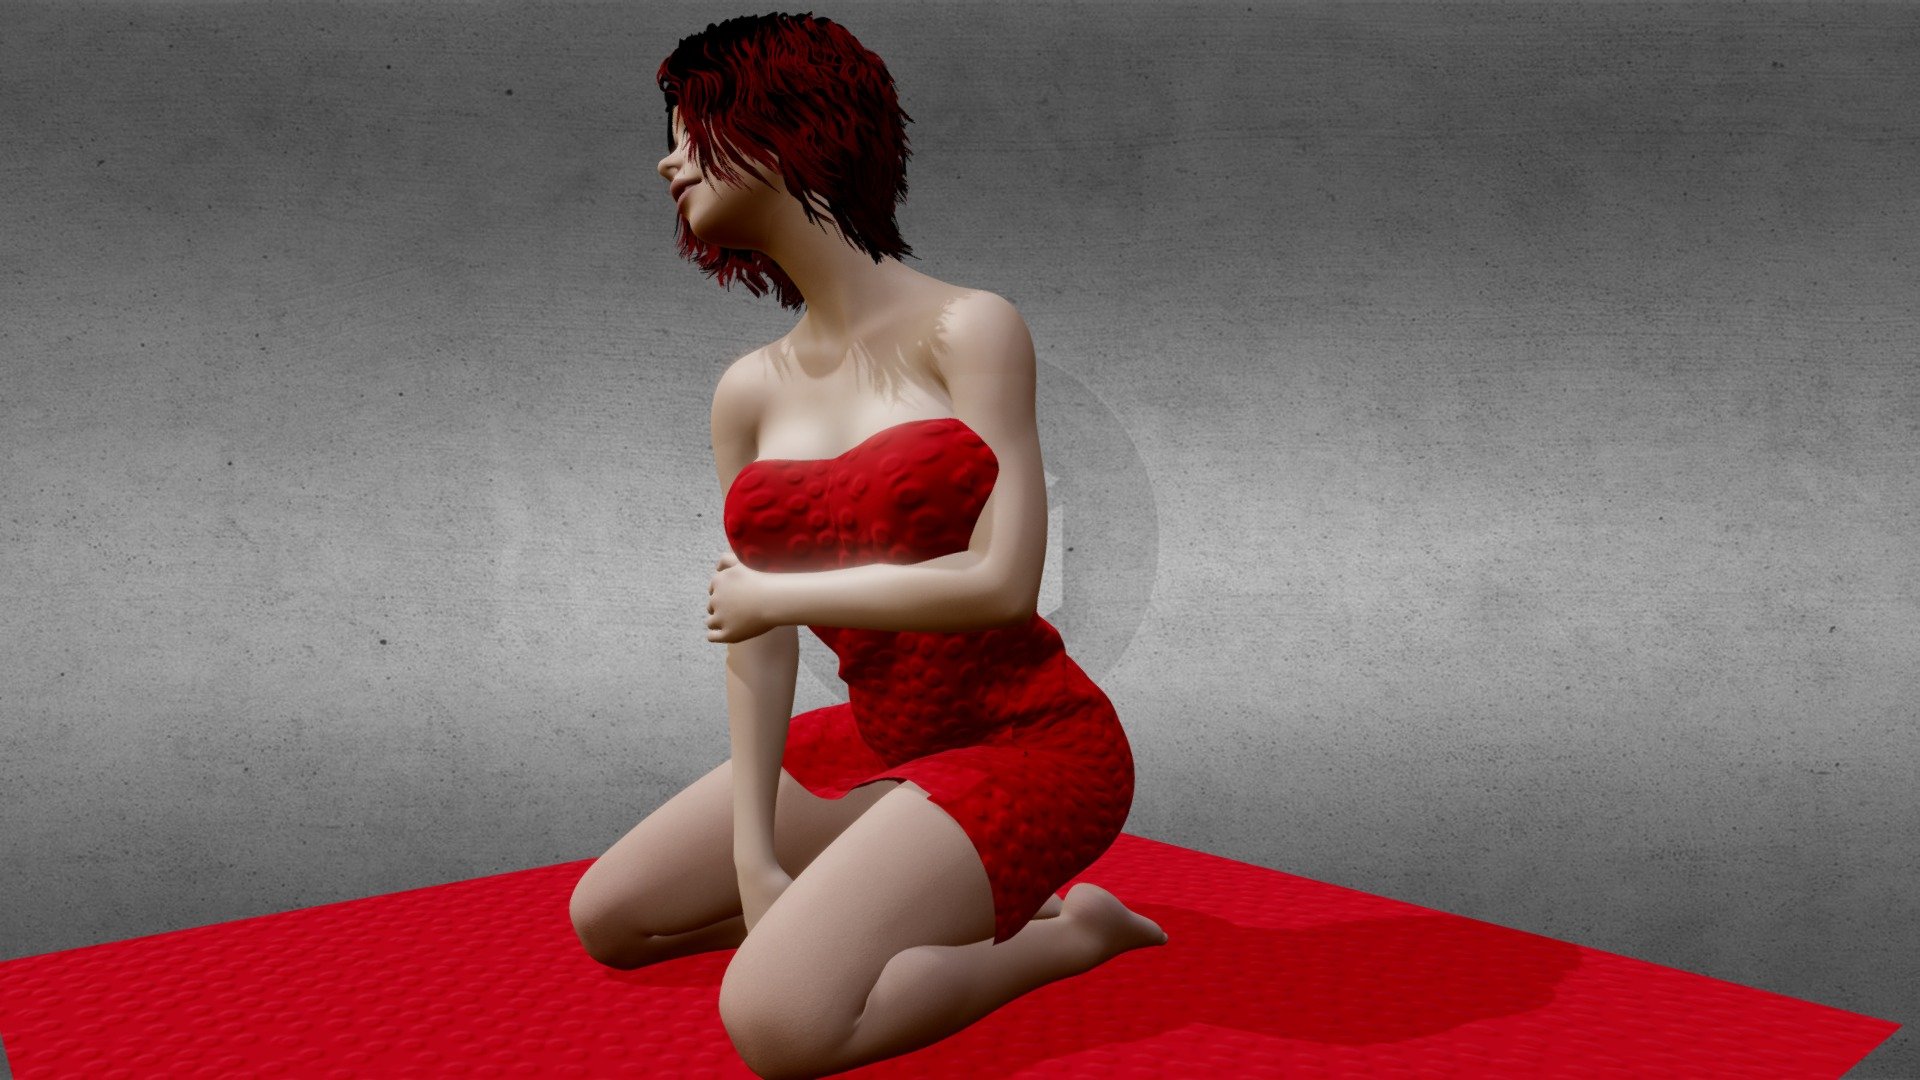 Another naked woman. Thousands of them 3d model